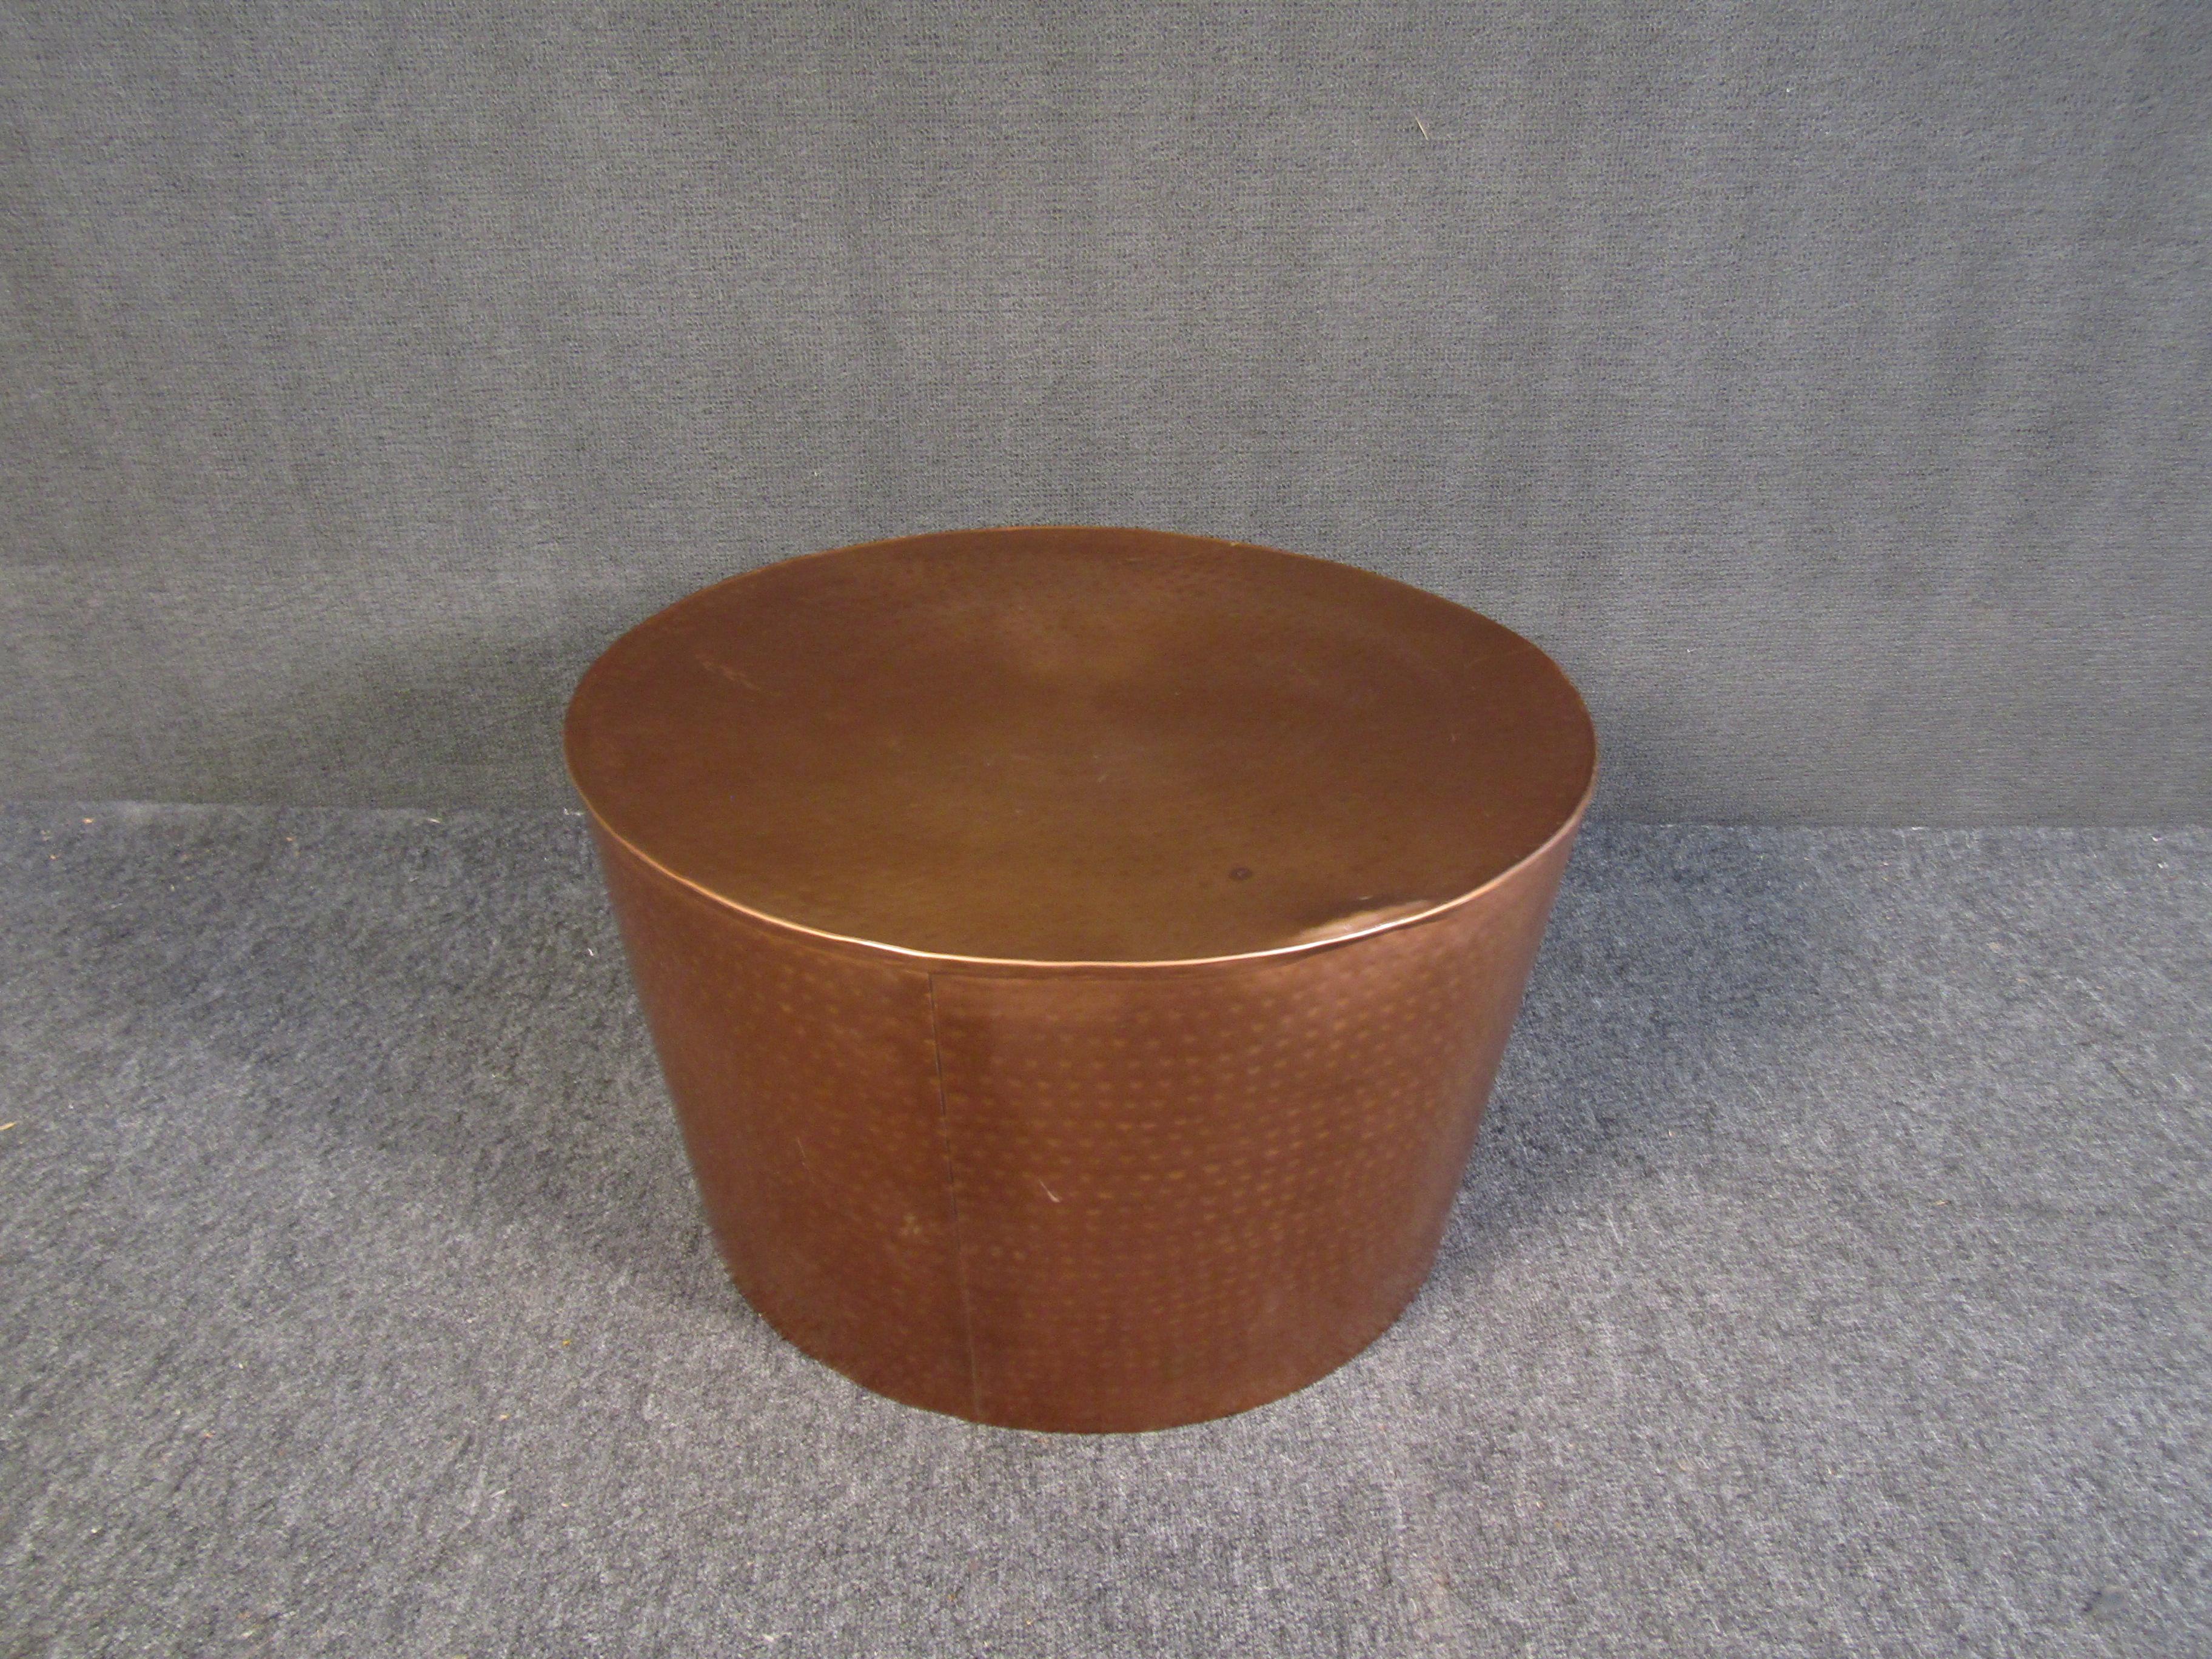 An unusual round side table that is sure to accent any room or space with its unique mid-century look and perforated copper surface. Please confirm item location with seller (NY/NJ).